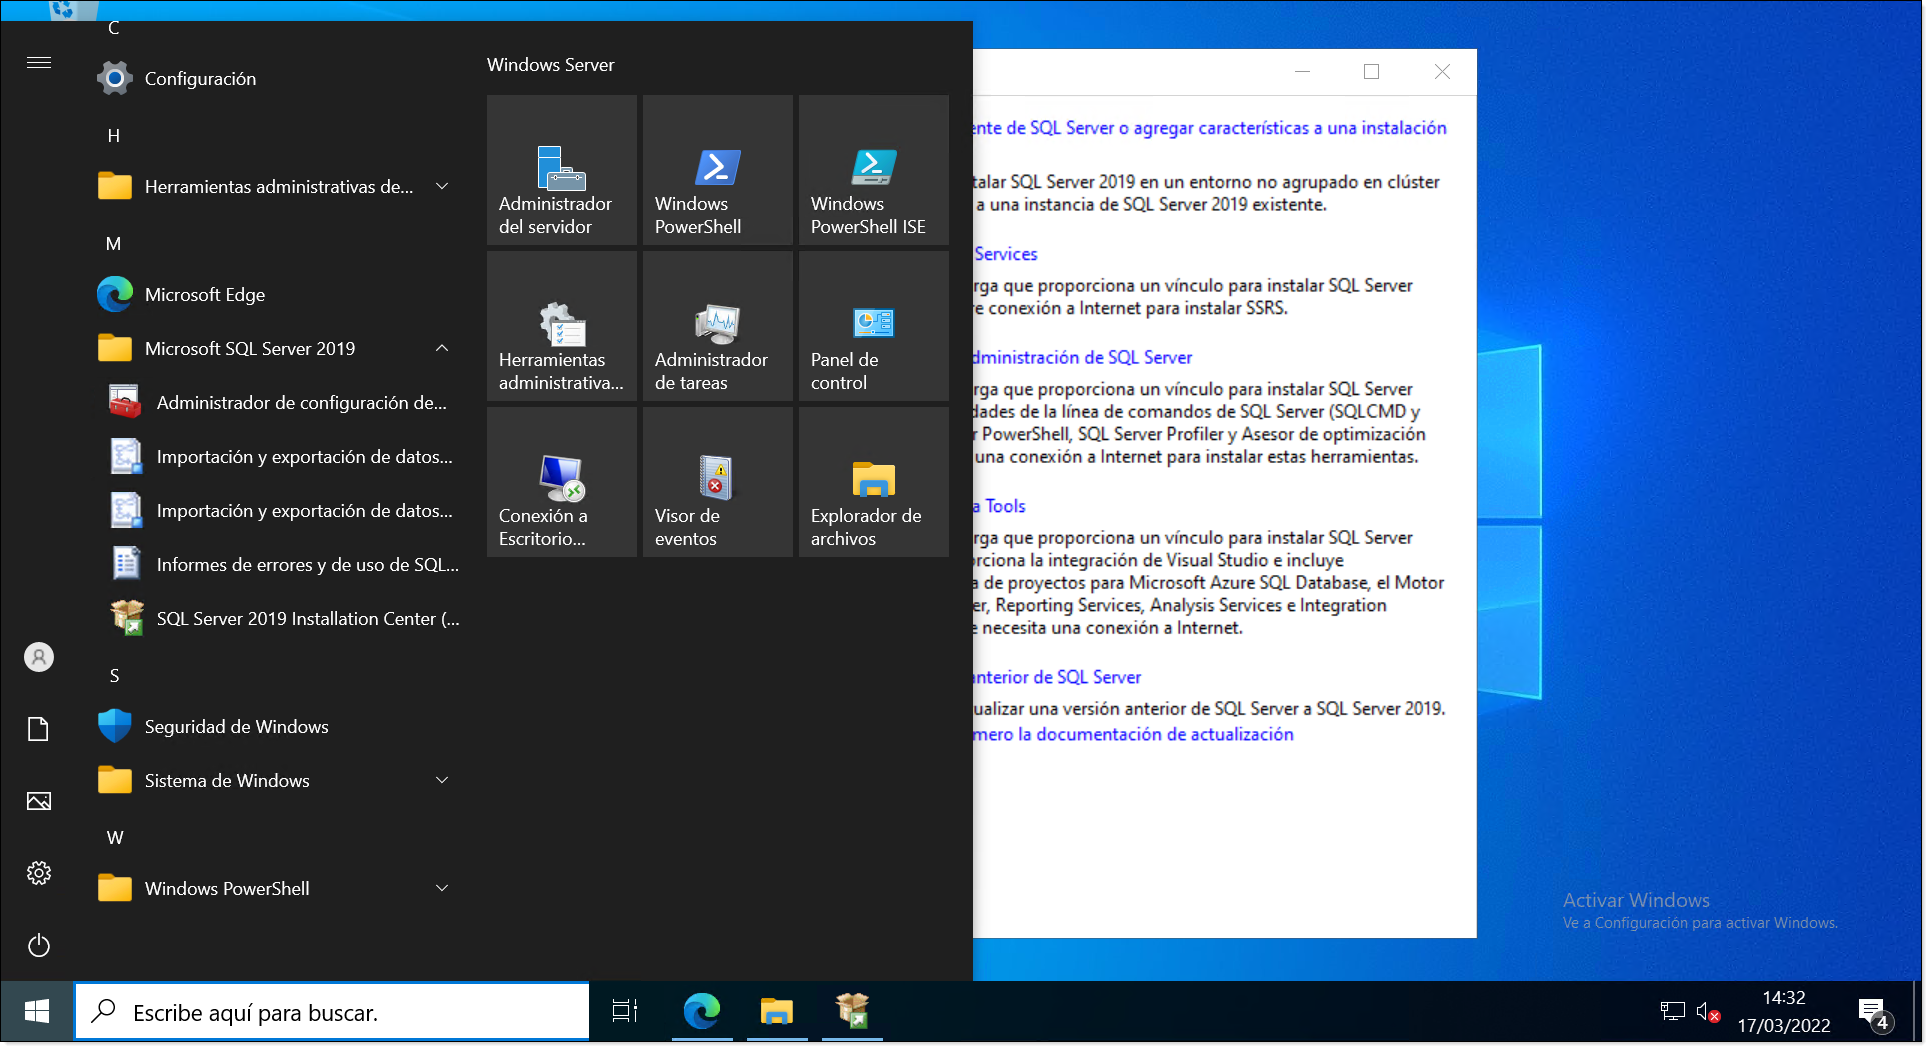 Part 2 - SQL Server will now appear in the start menu